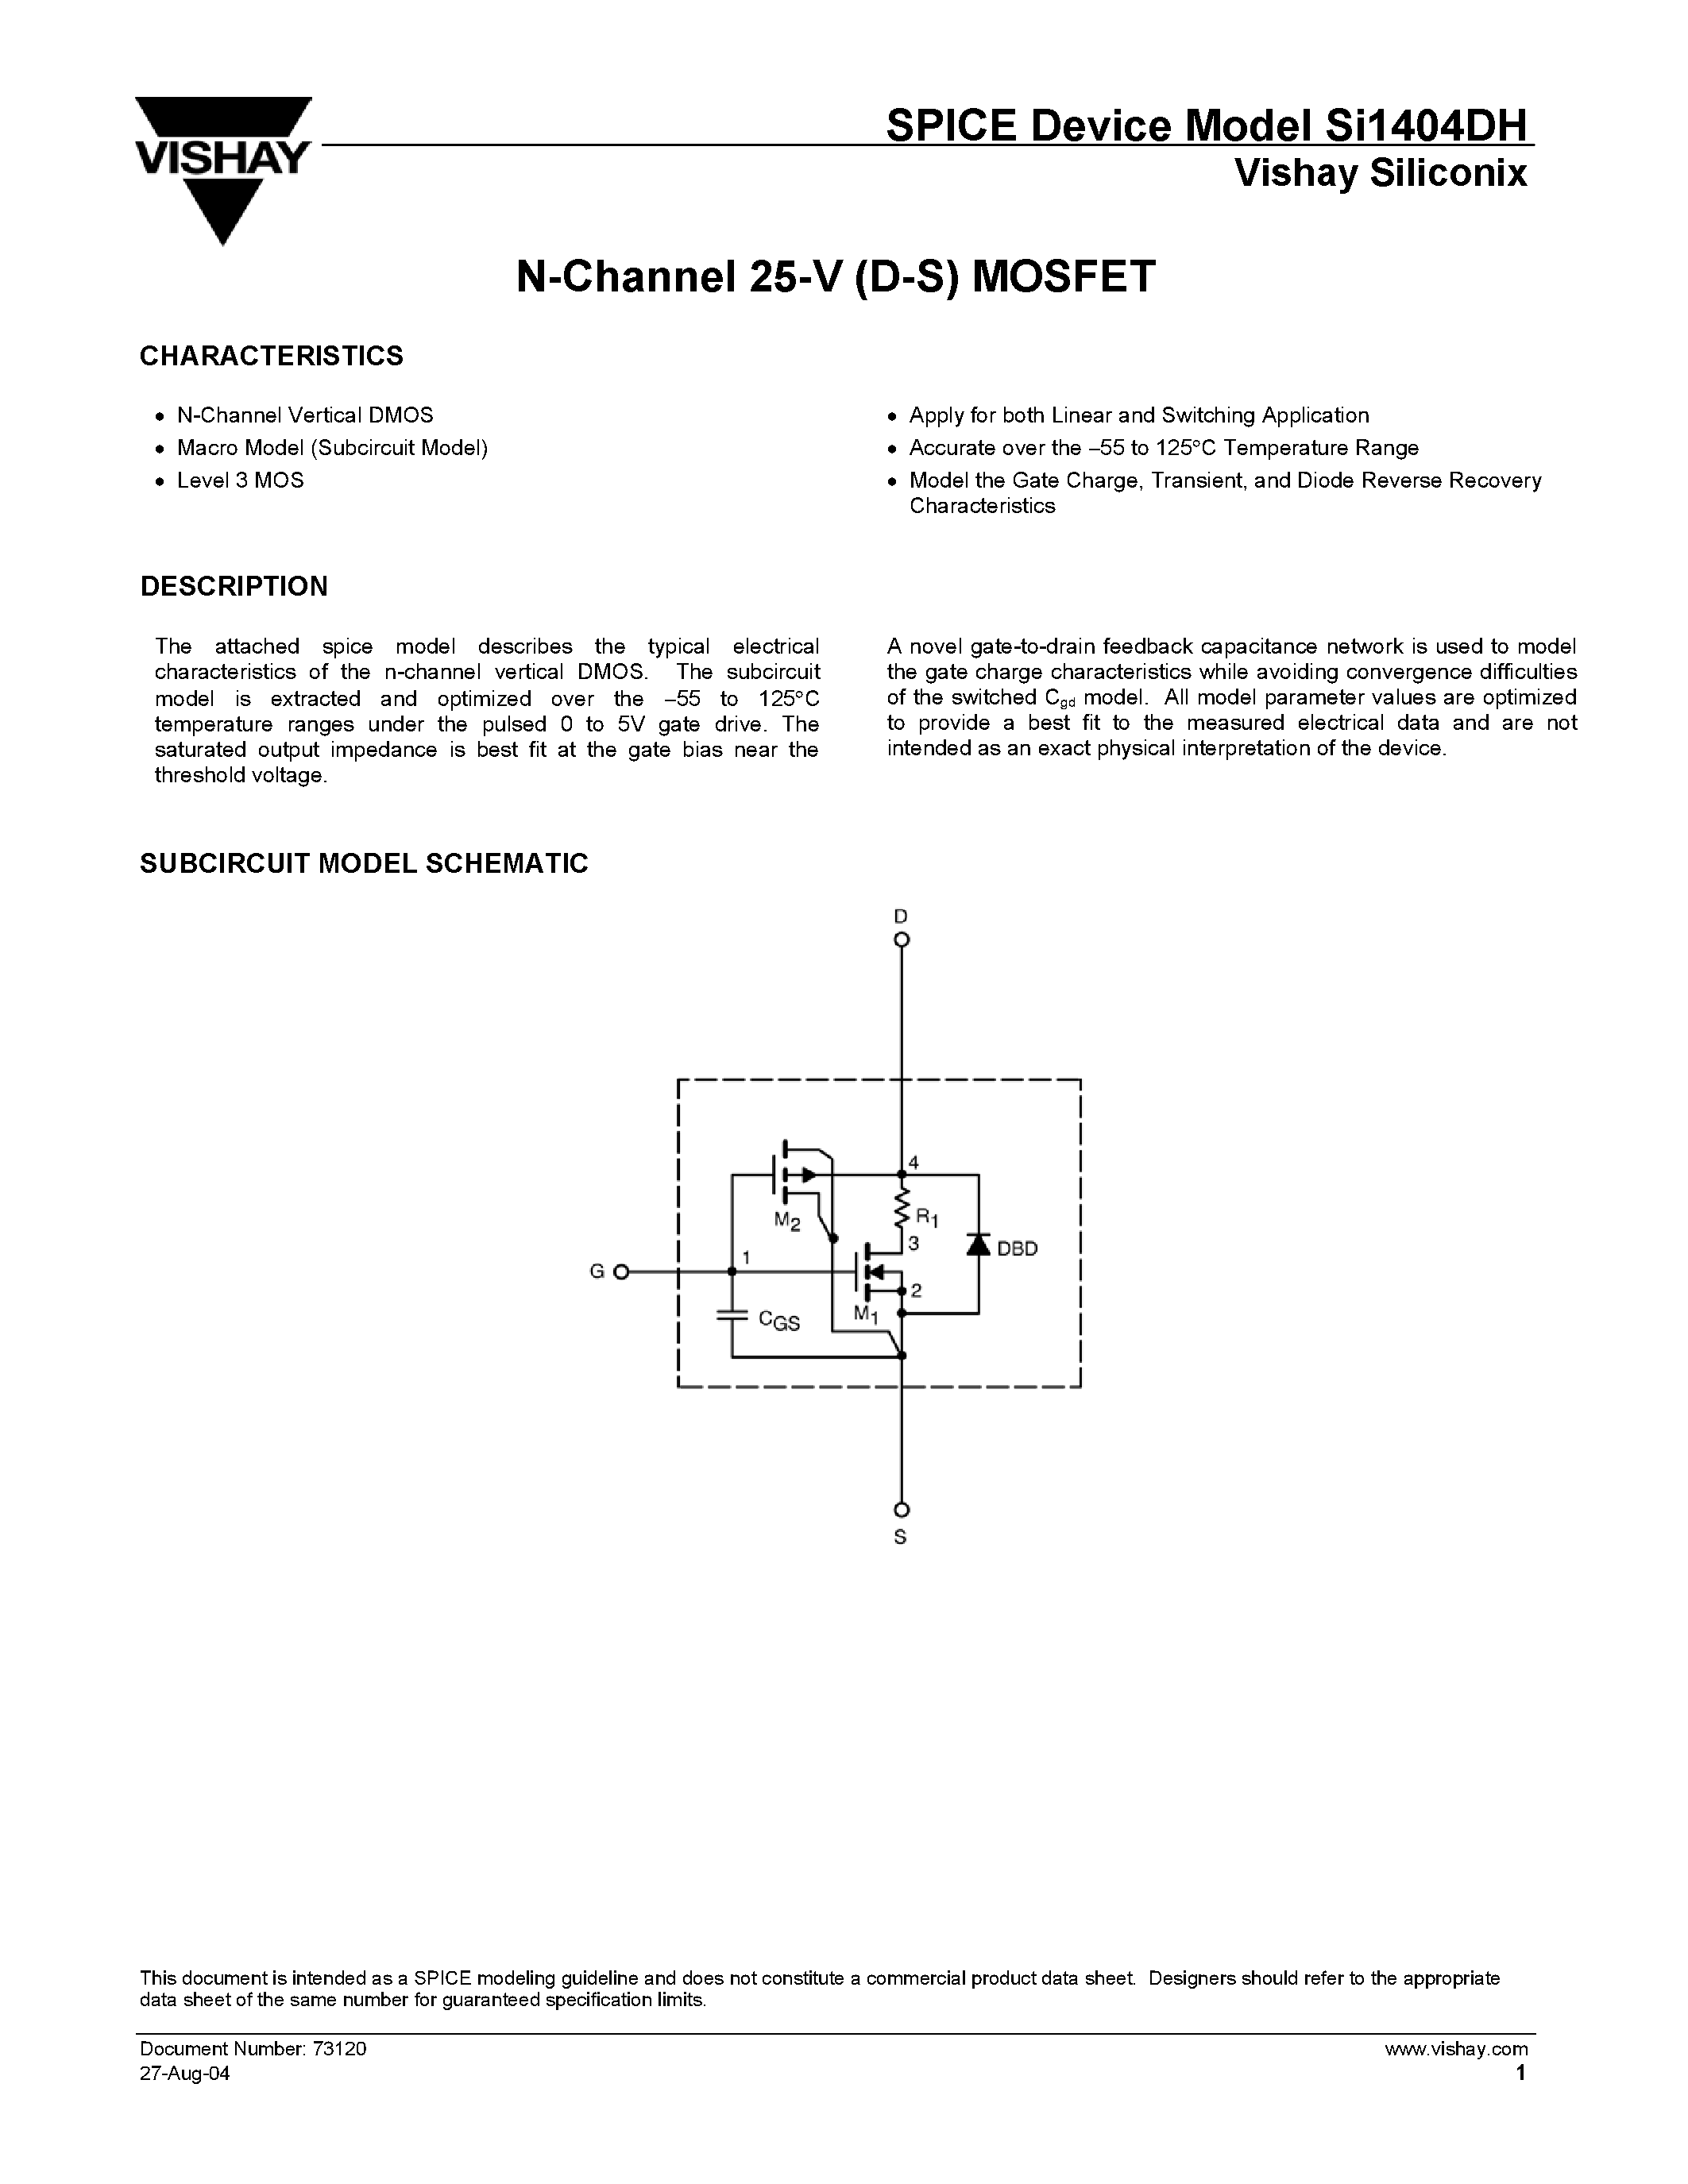 Datasheet SI1404DH - N-Channel 25-V (D-S) MOSFET page 1